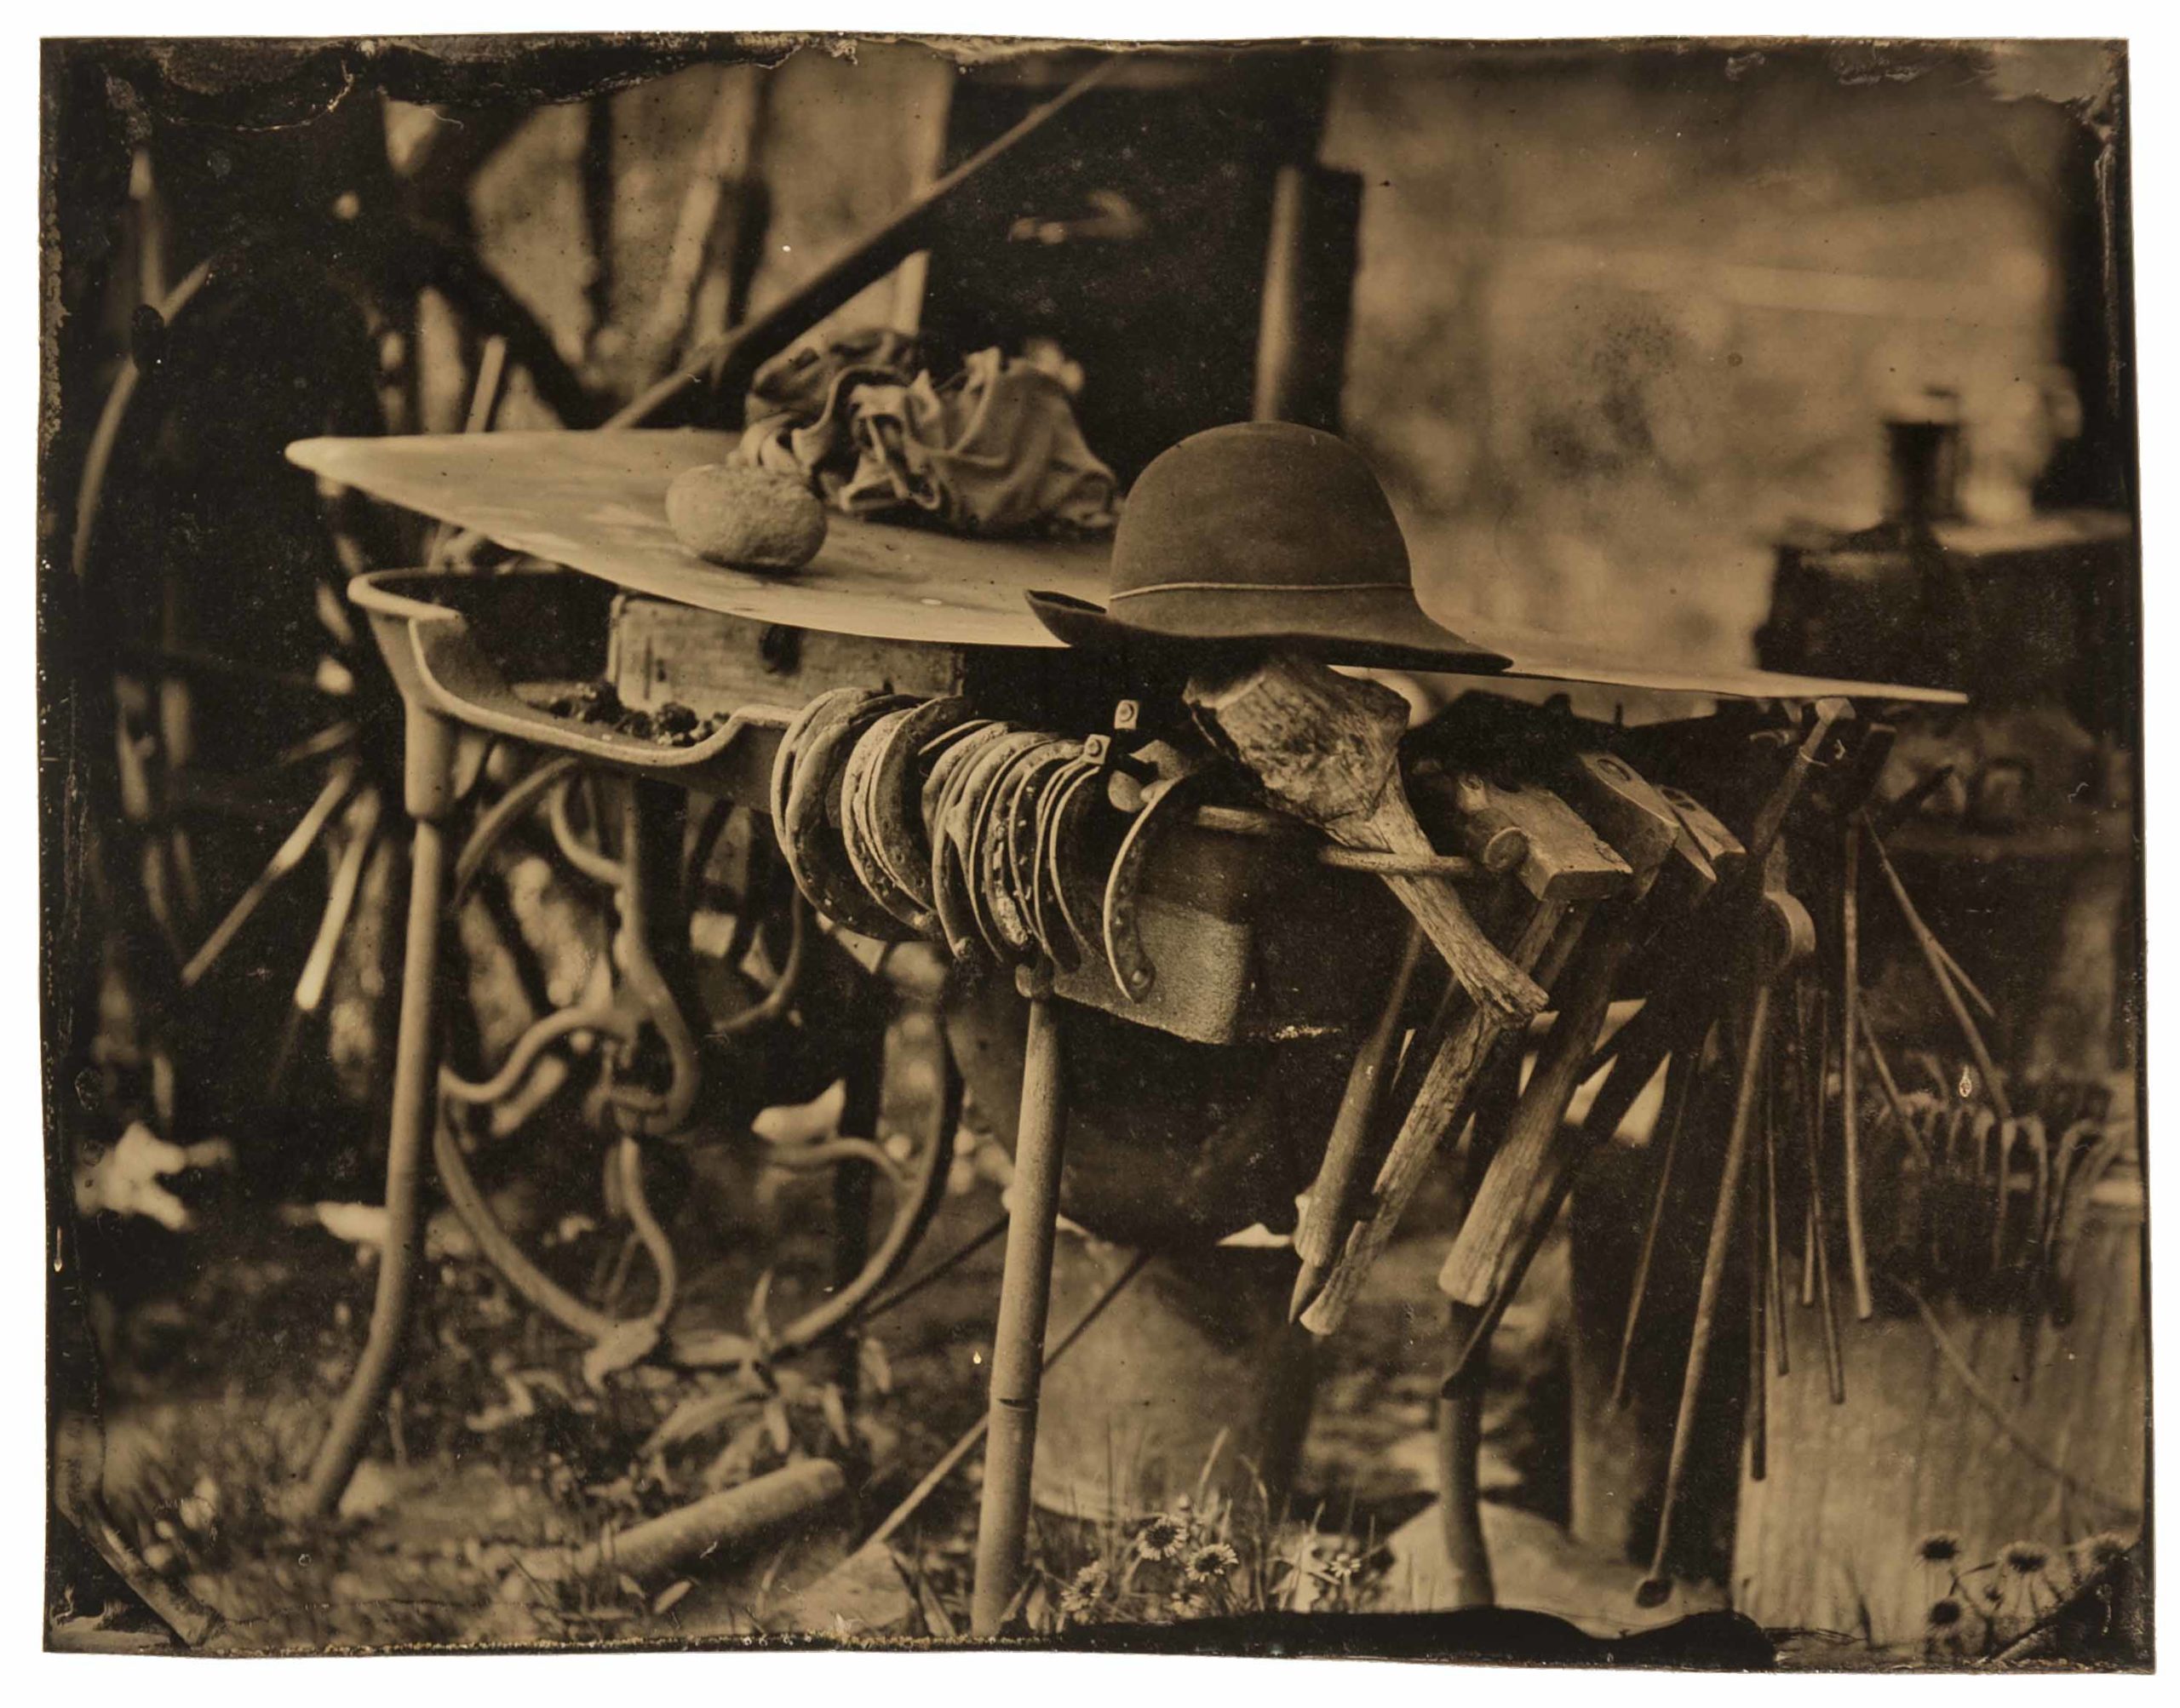 
		                					John Coffer		                																	
																											<i>My Hat on My Forge,</i>  
																																								2005, 
																																								tintype, 
																																								4 x 5 1/4 inches 
																								
		                				